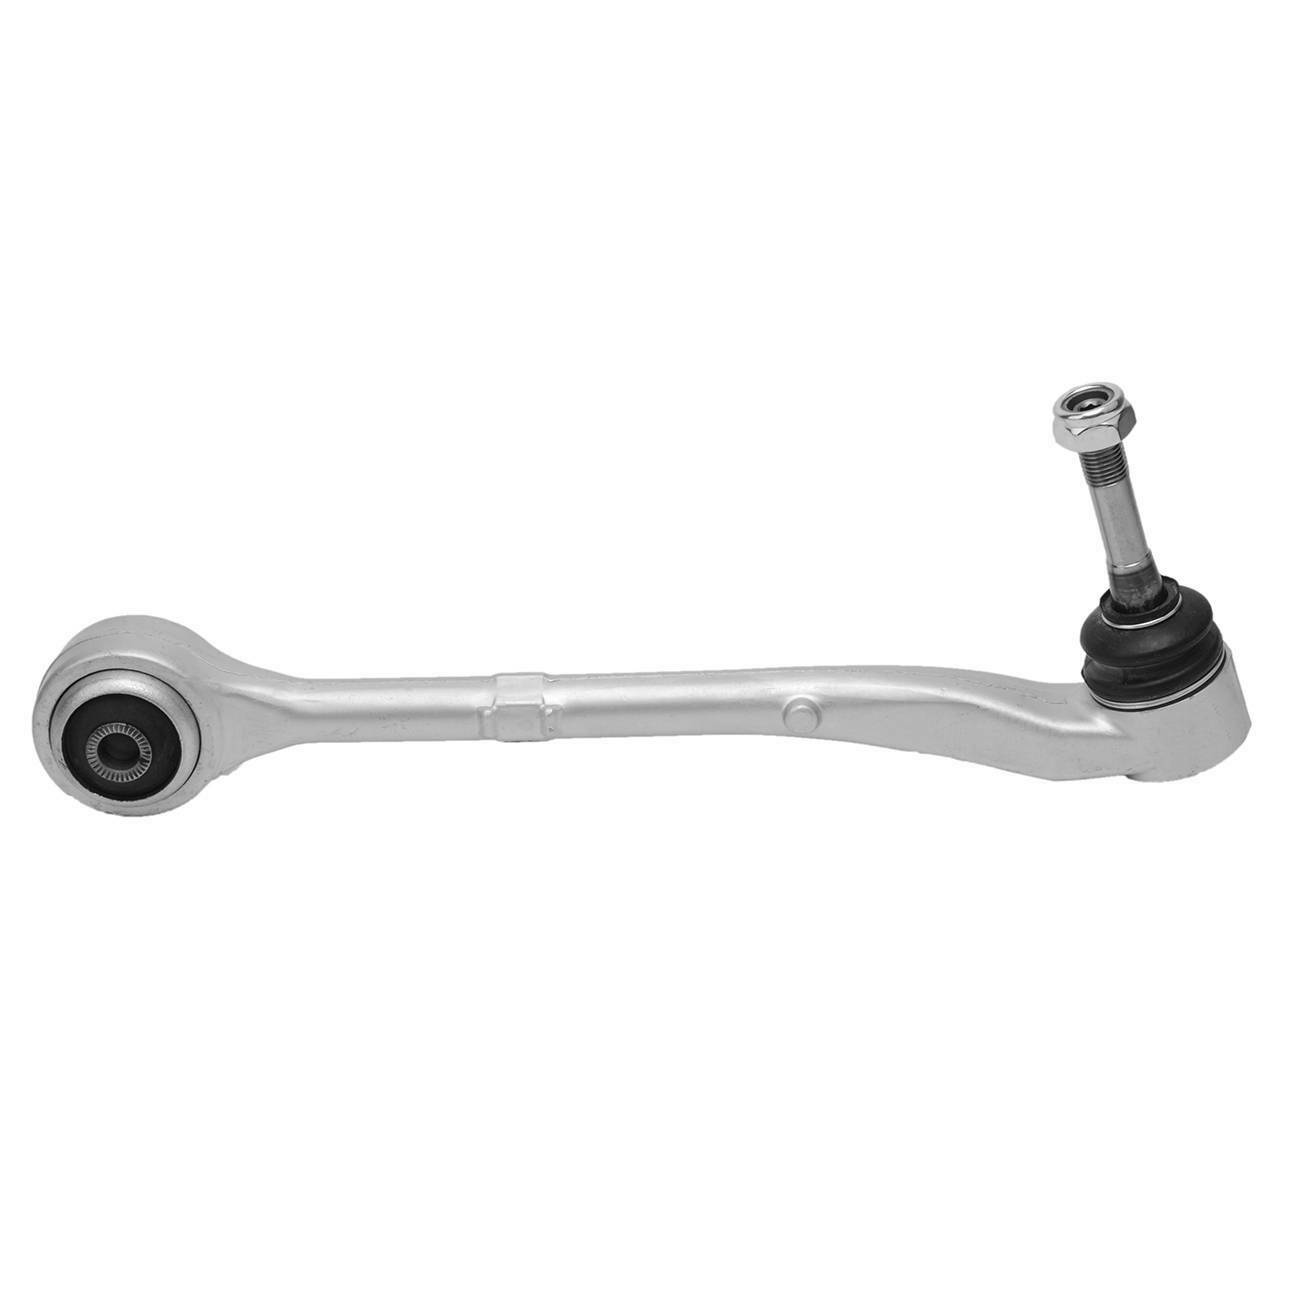 Lower Front Left Control Arm for BMW 5 Series E39 535i 540i 31121141961 German Made